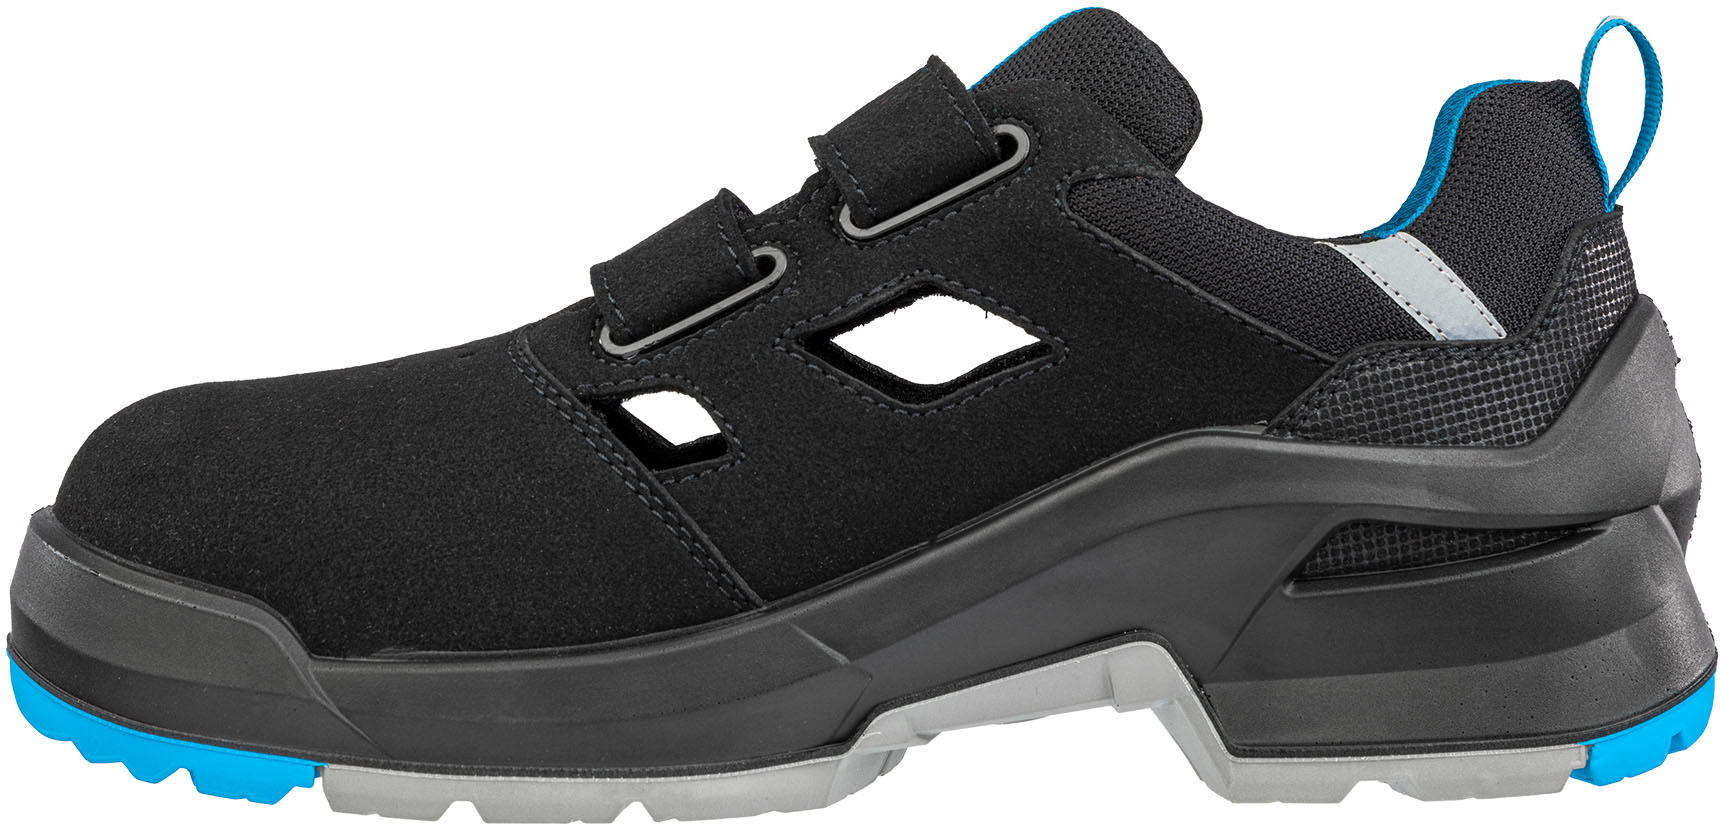 Forge Air ESD S1 Black/Blue Low